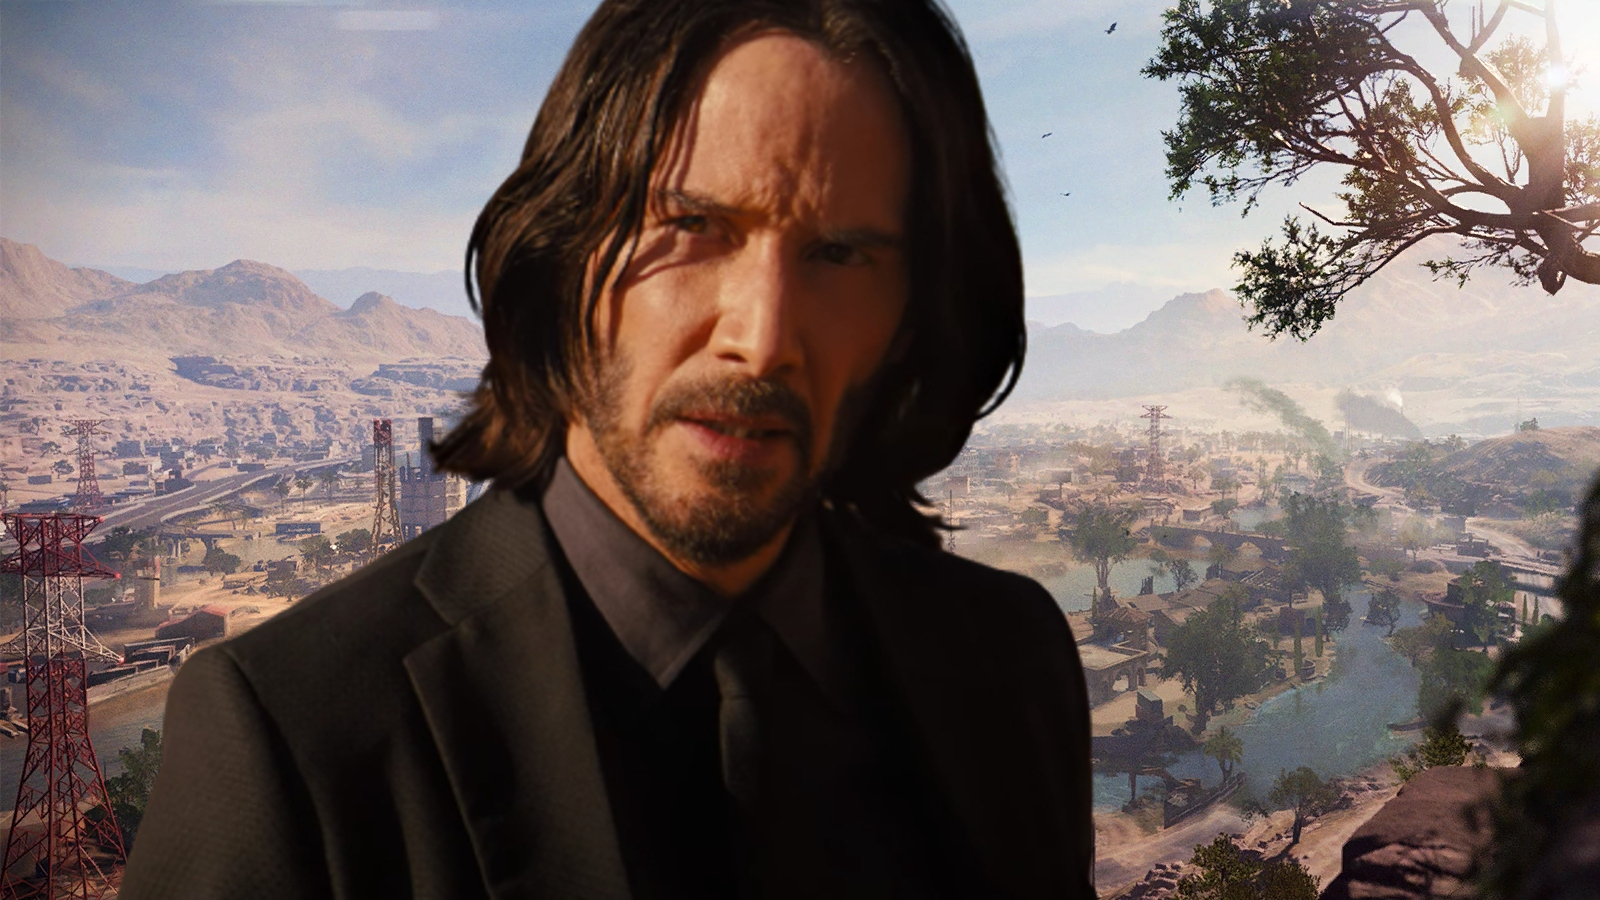 Warzone 2 fans plead for John Wick to be the next major crossover – Dexerto